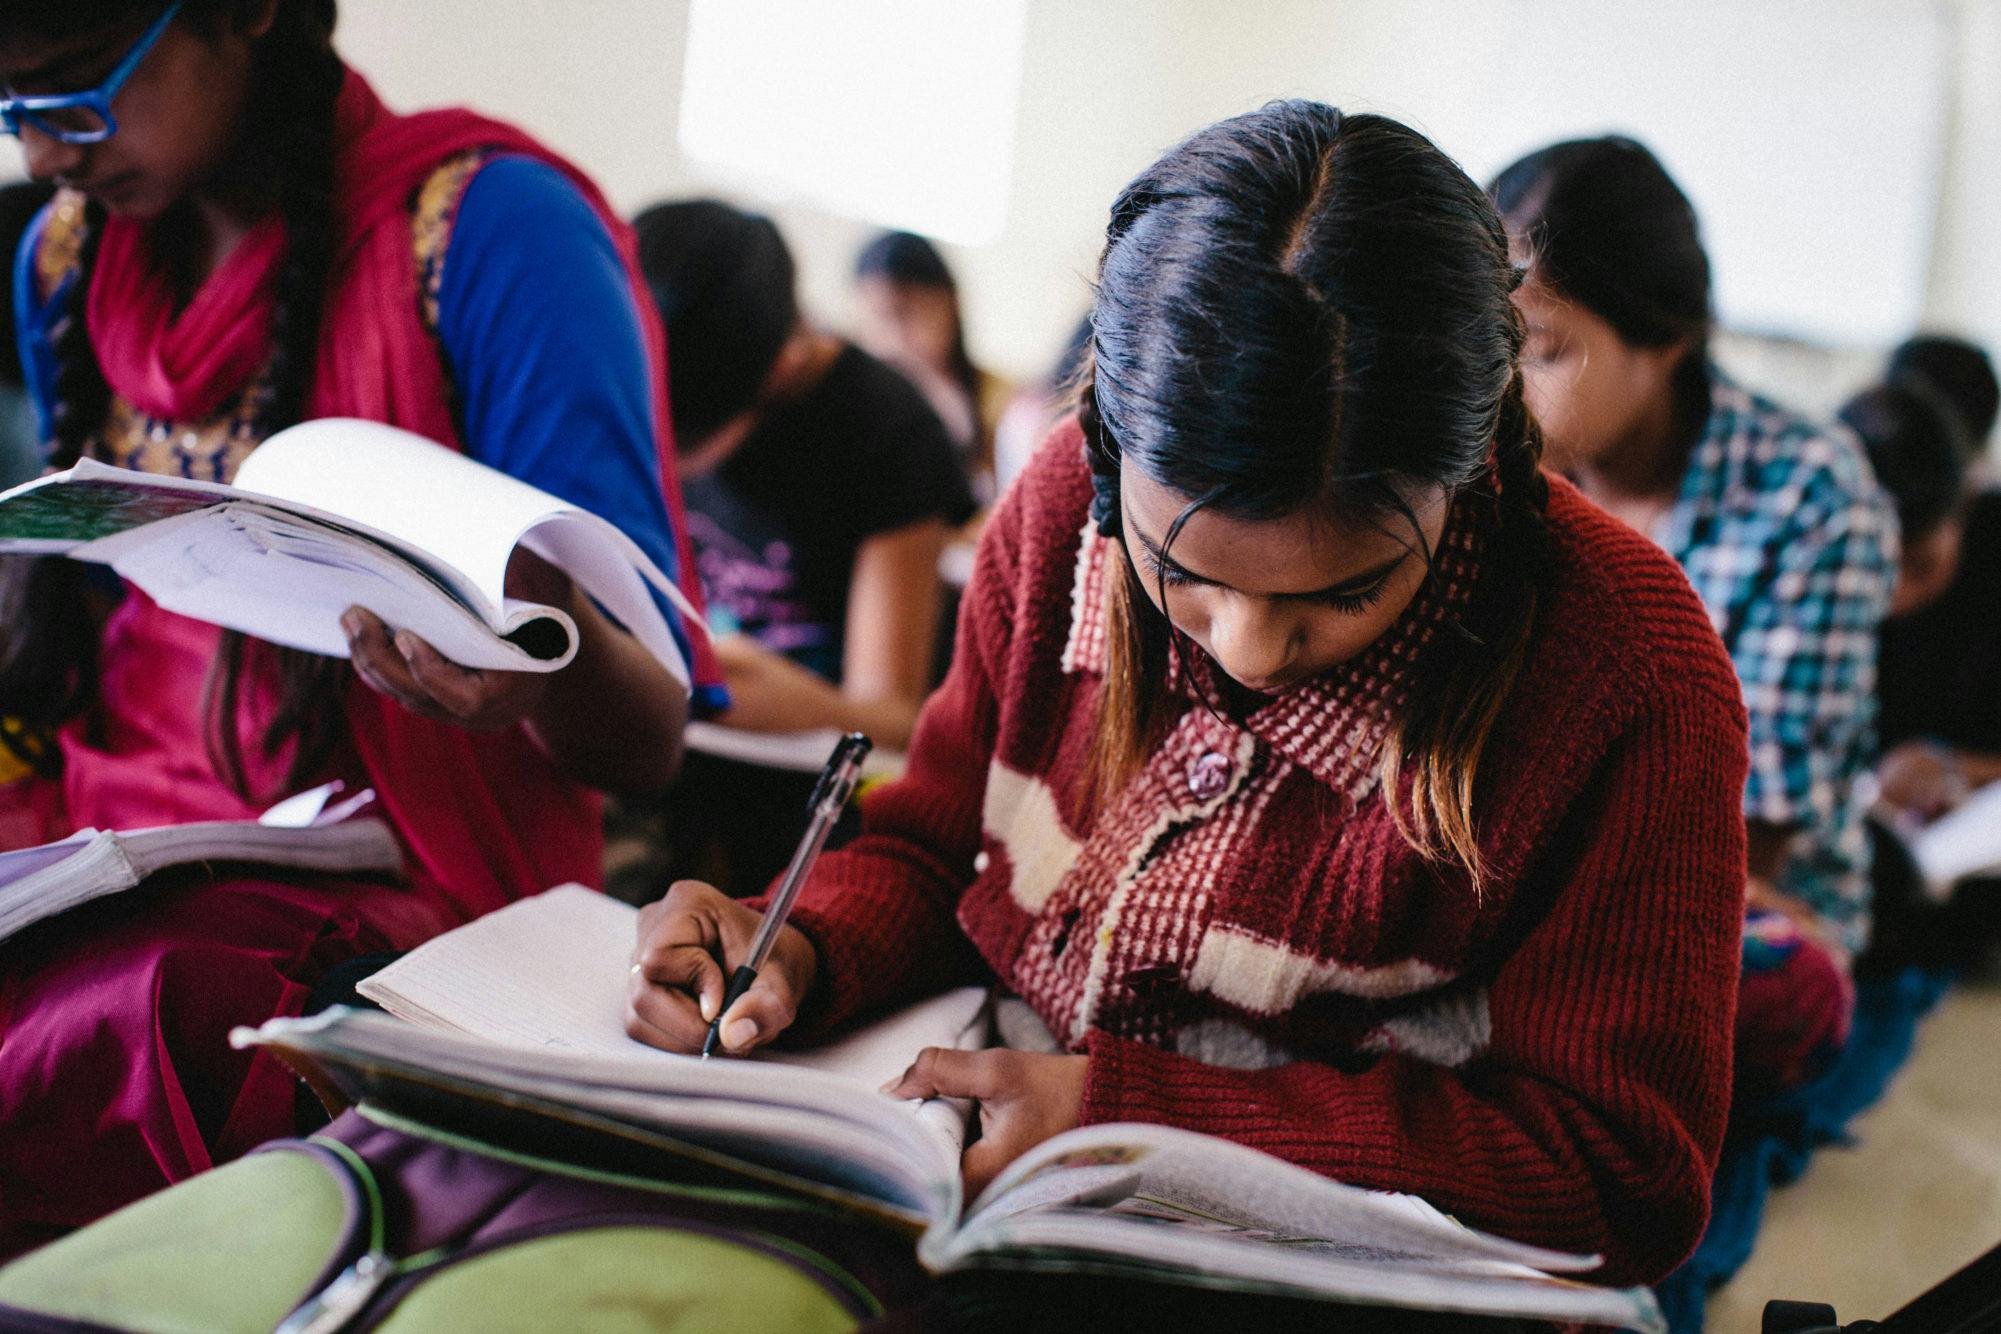 School girl in India wearing a red coat focuses on her studies and looks down at book